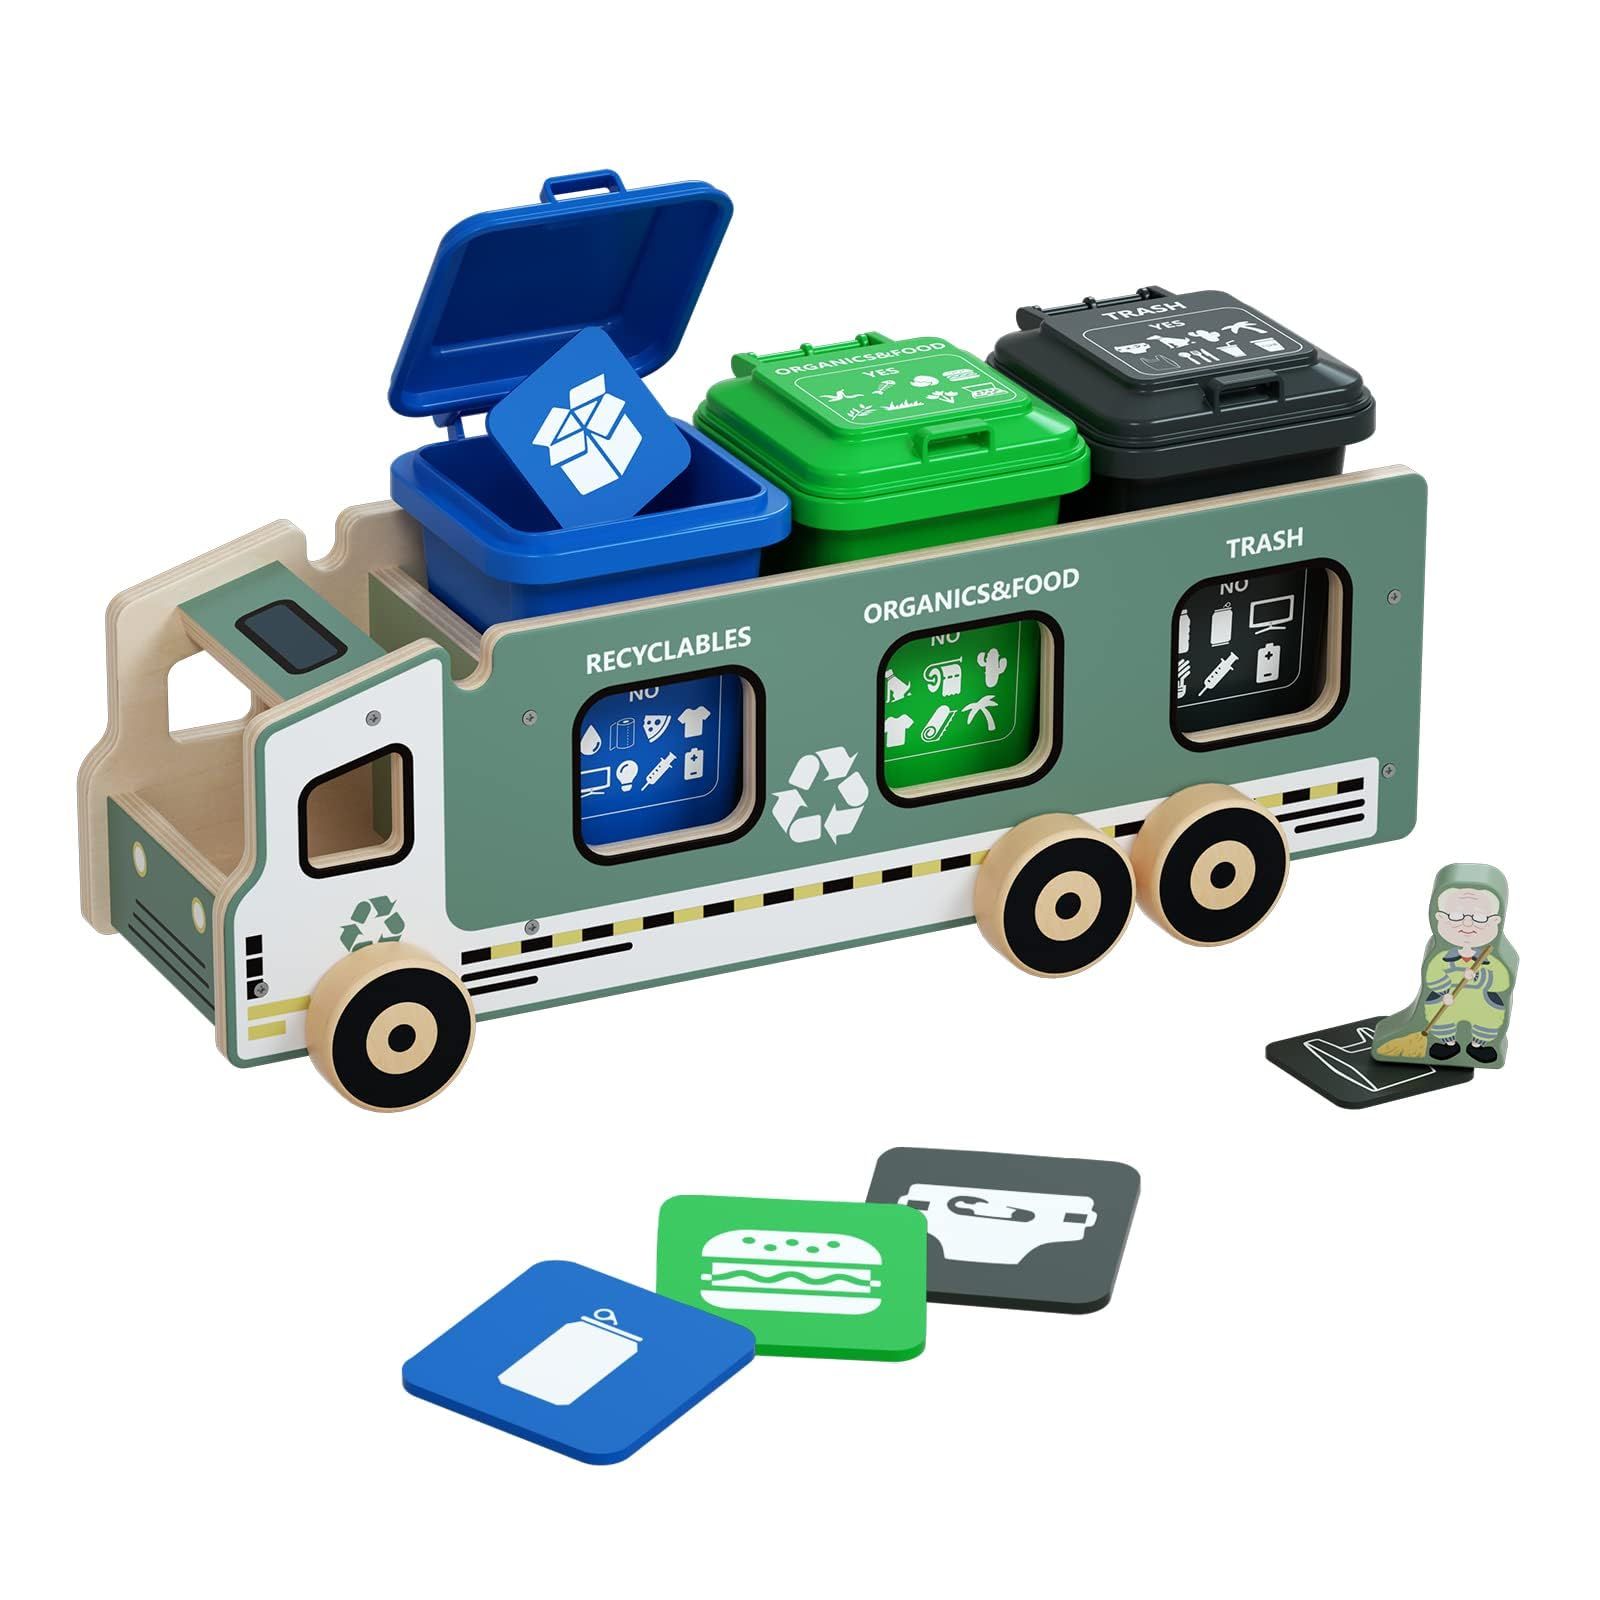 Large Wooden Garbage Truck Toy, Waste Management Recycling Truck Toy with 3 Trash Cans, Educational Toys and Gift for Kids, Toddlers, Boys, Girls 3 4 5 6 7 Years Old | Amazon (US)